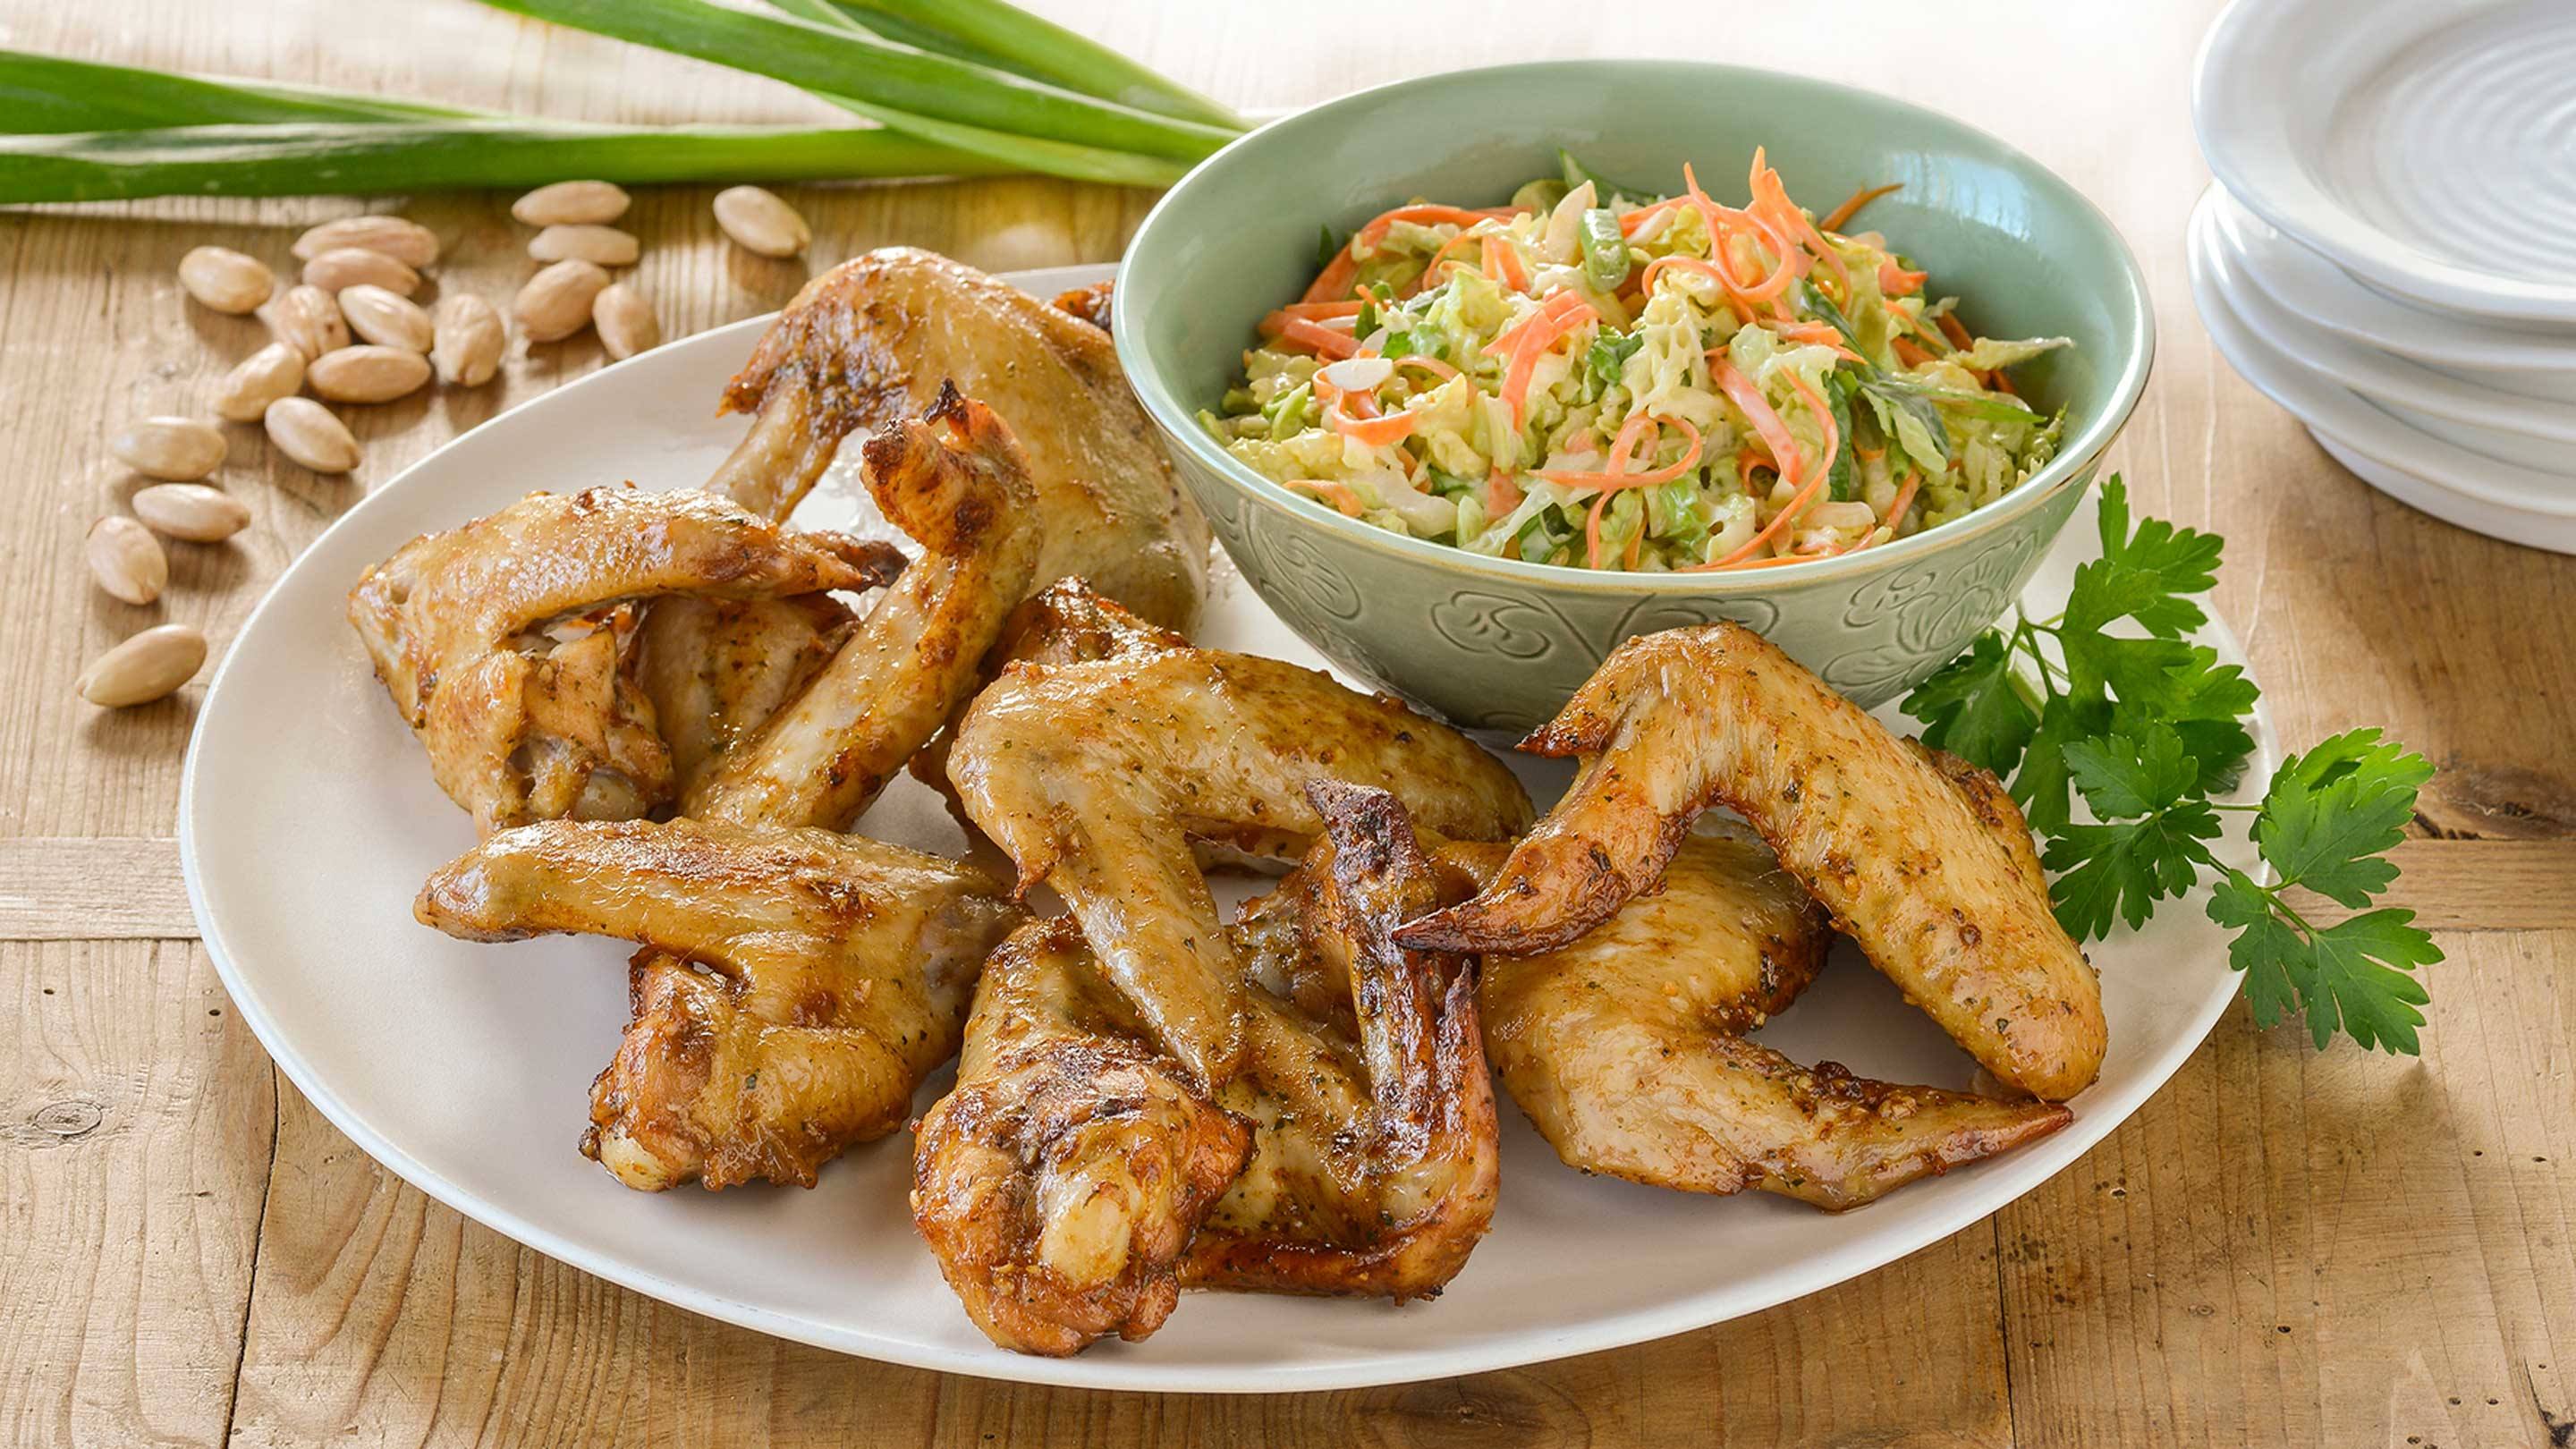 Garlic & Herb Chicken Wings Recipe with Coleslaw